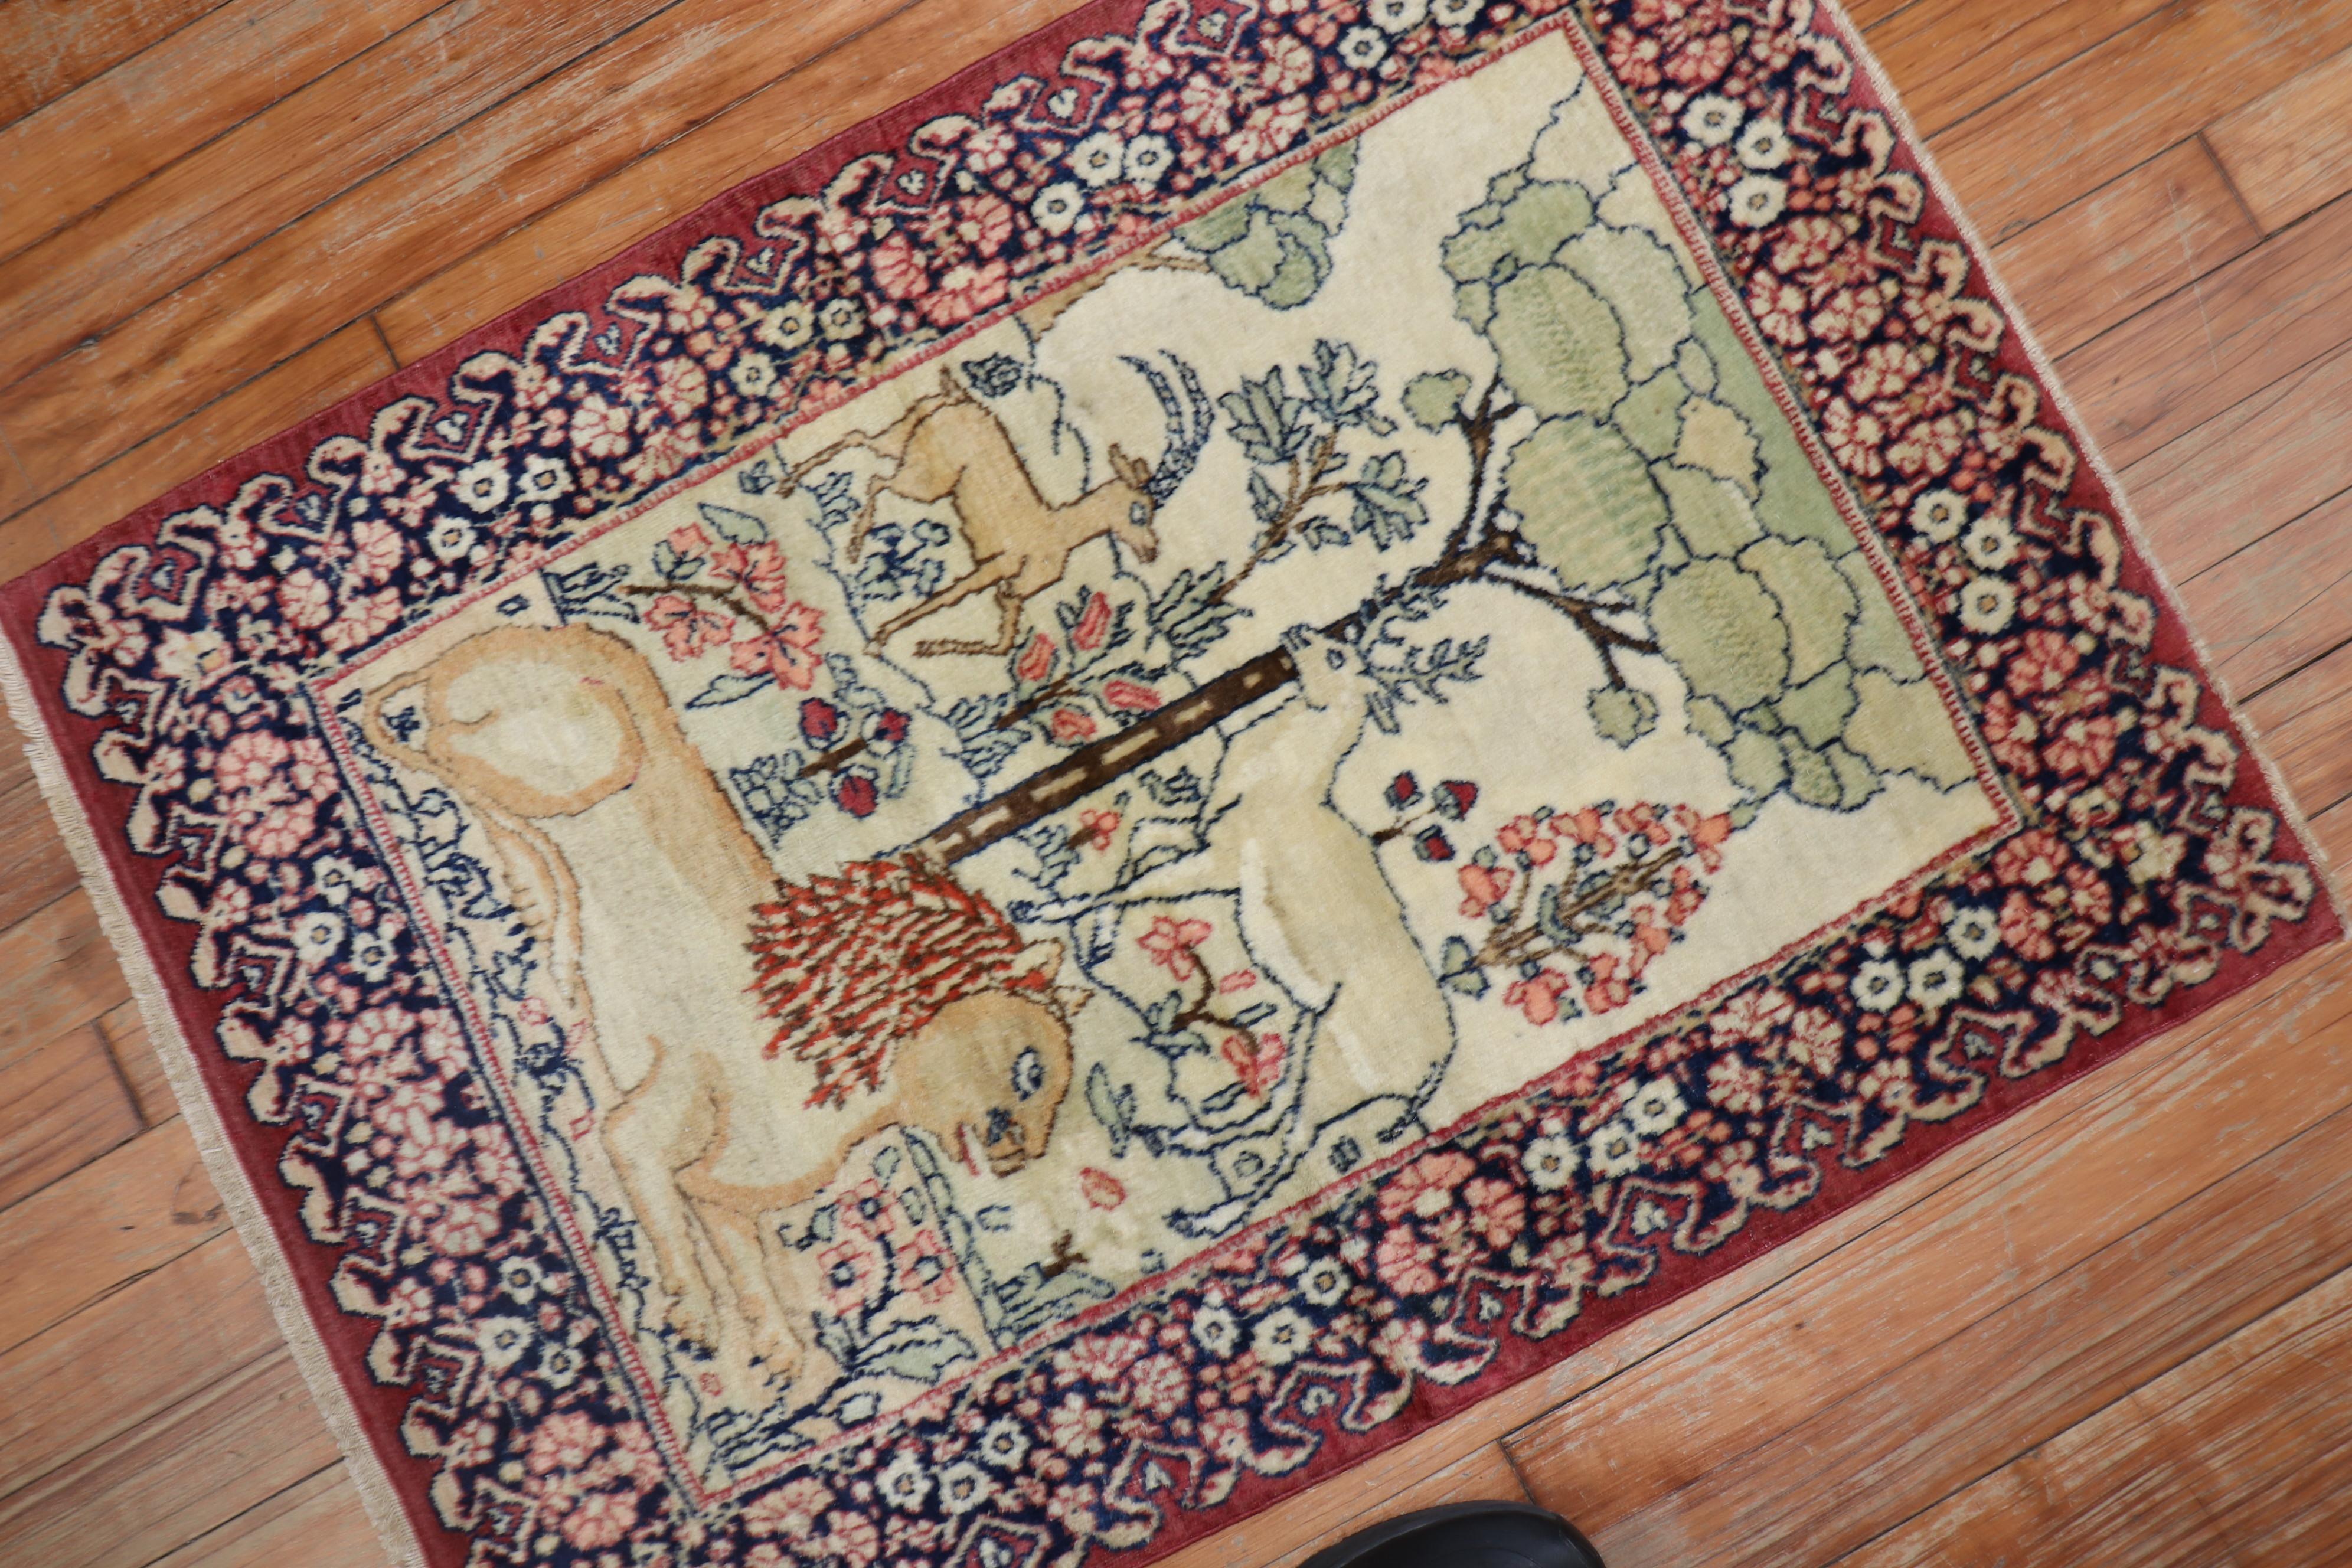 An early 20th century Persian Lavar Kerman pictorial rug with a lion, deer and goat covering a scenic forest scenery. The field ivory, the border is a rosy red. The traditional colors are seen in many lavar Kerman rugs. The weave on this is fine.